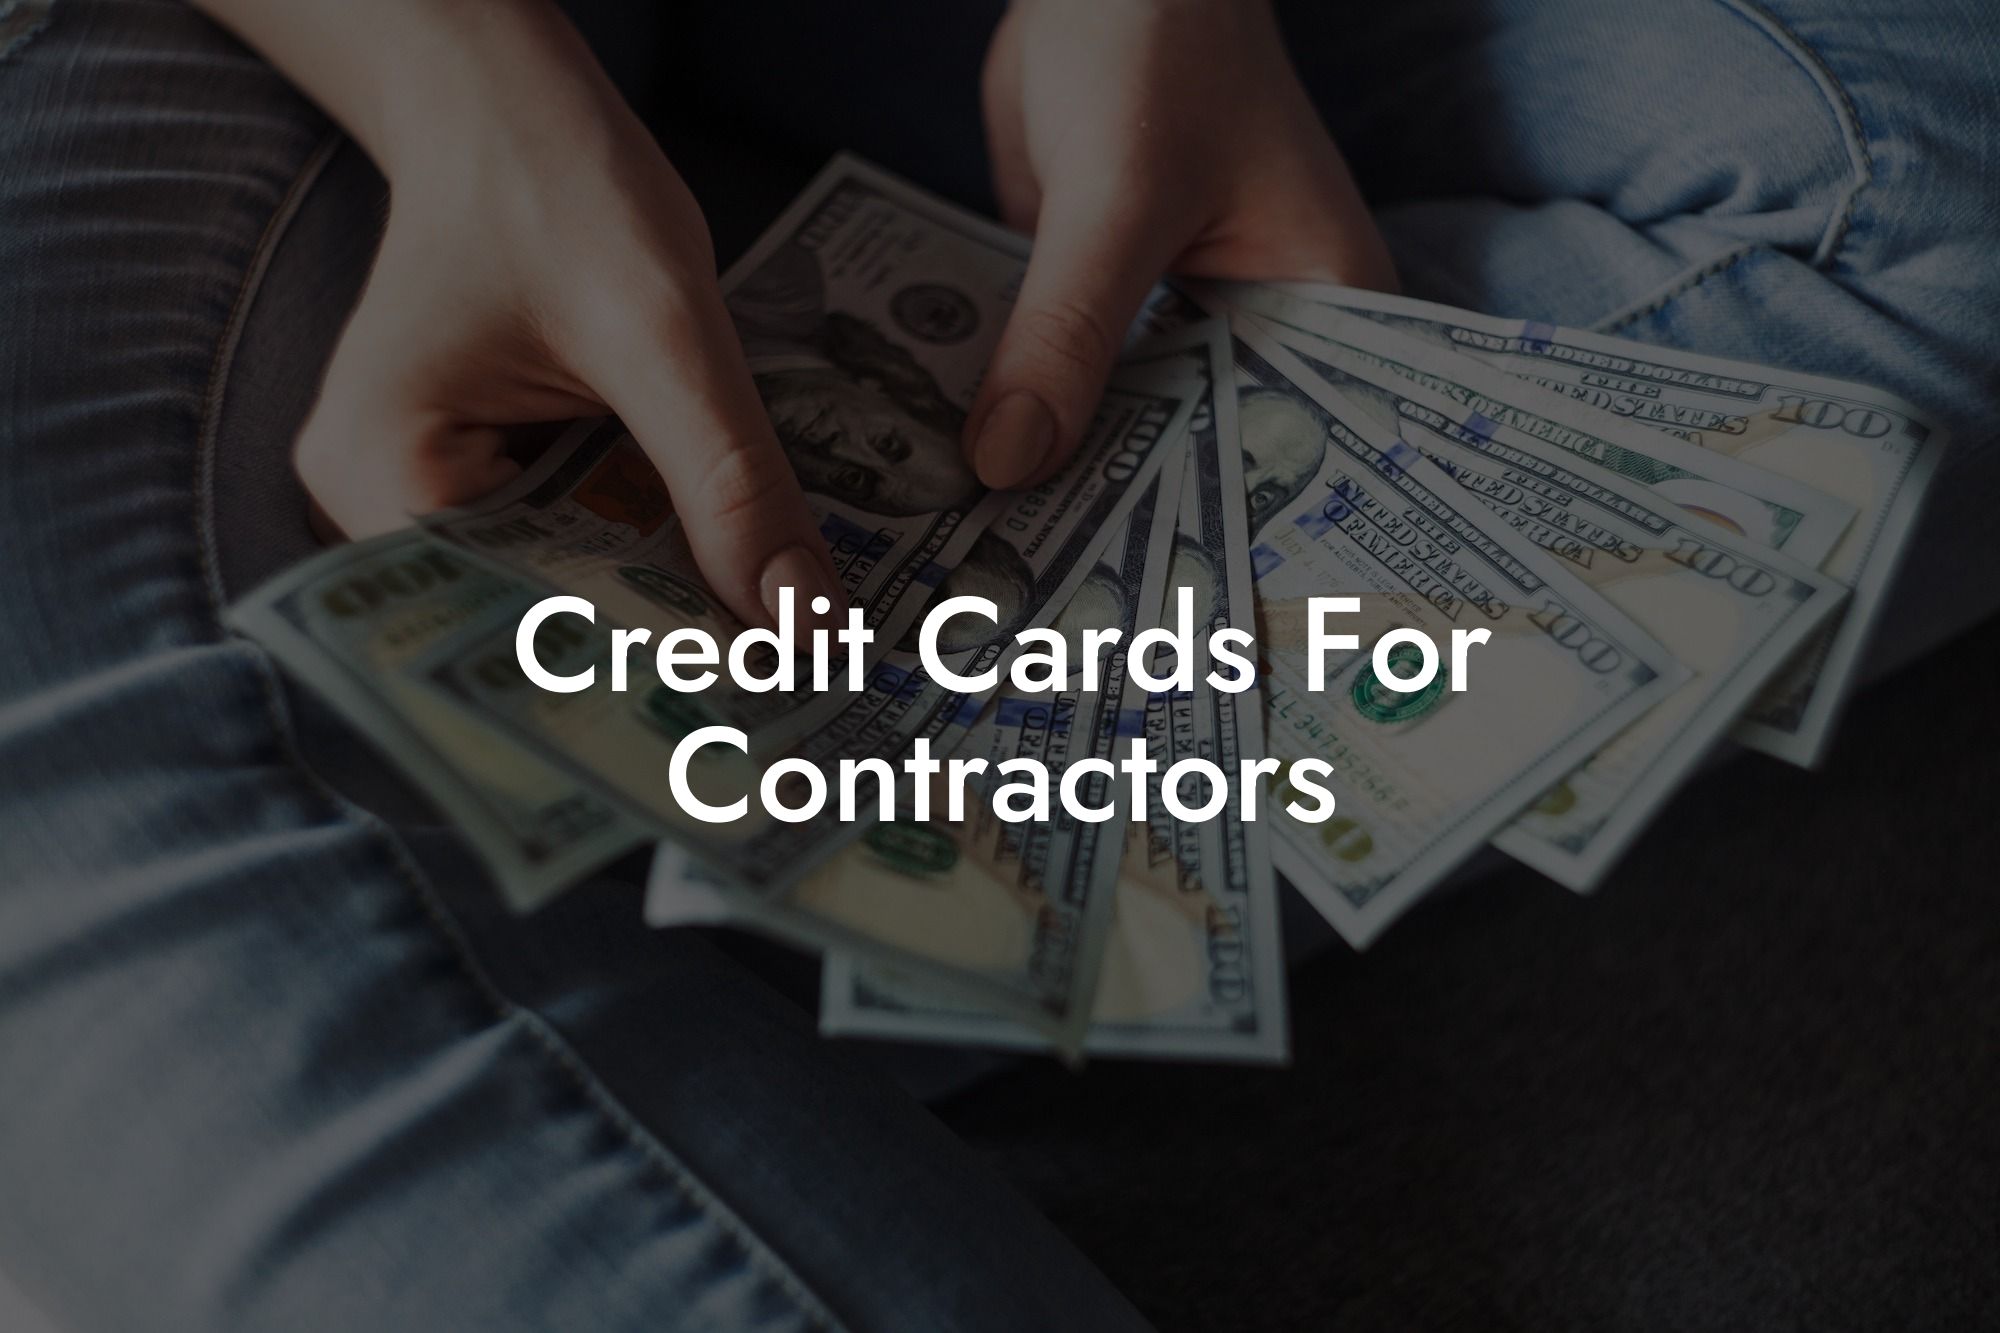 Credit Cards For Contractors